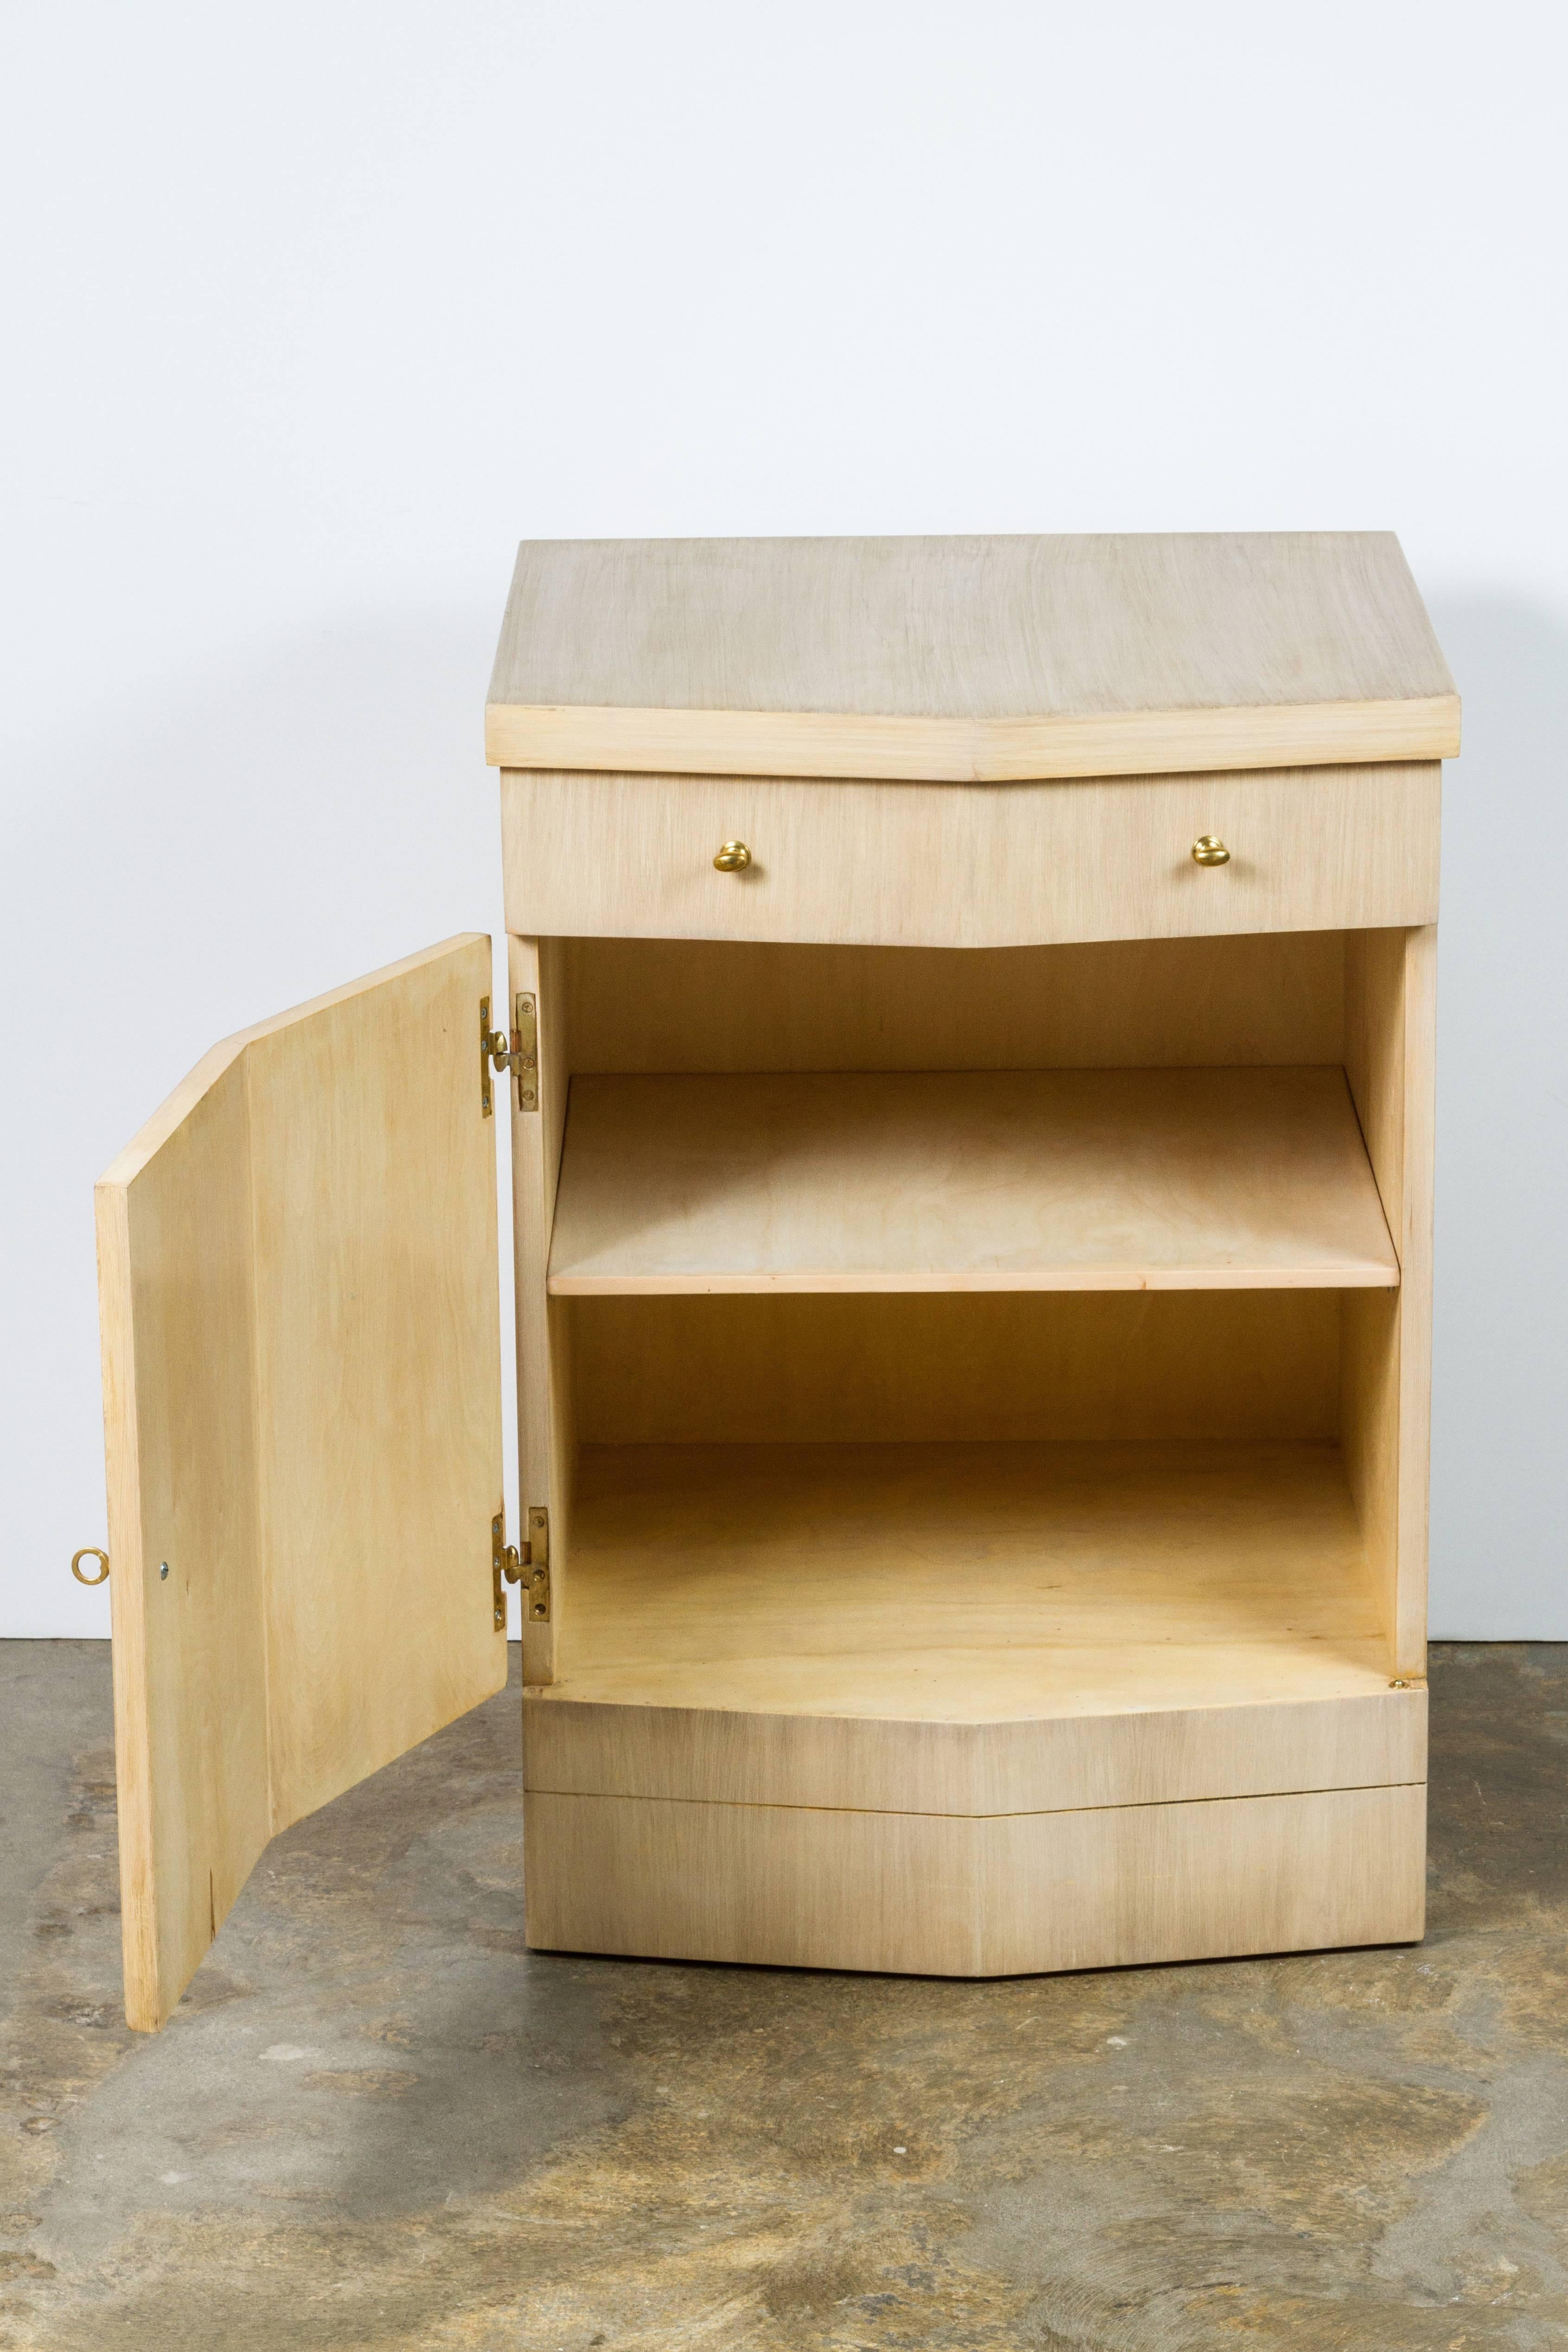 Paul Marra Pinnacle Nightstand in Bleached Douglas Fir In Excellent Condition For Sale In Los Angeles, CA